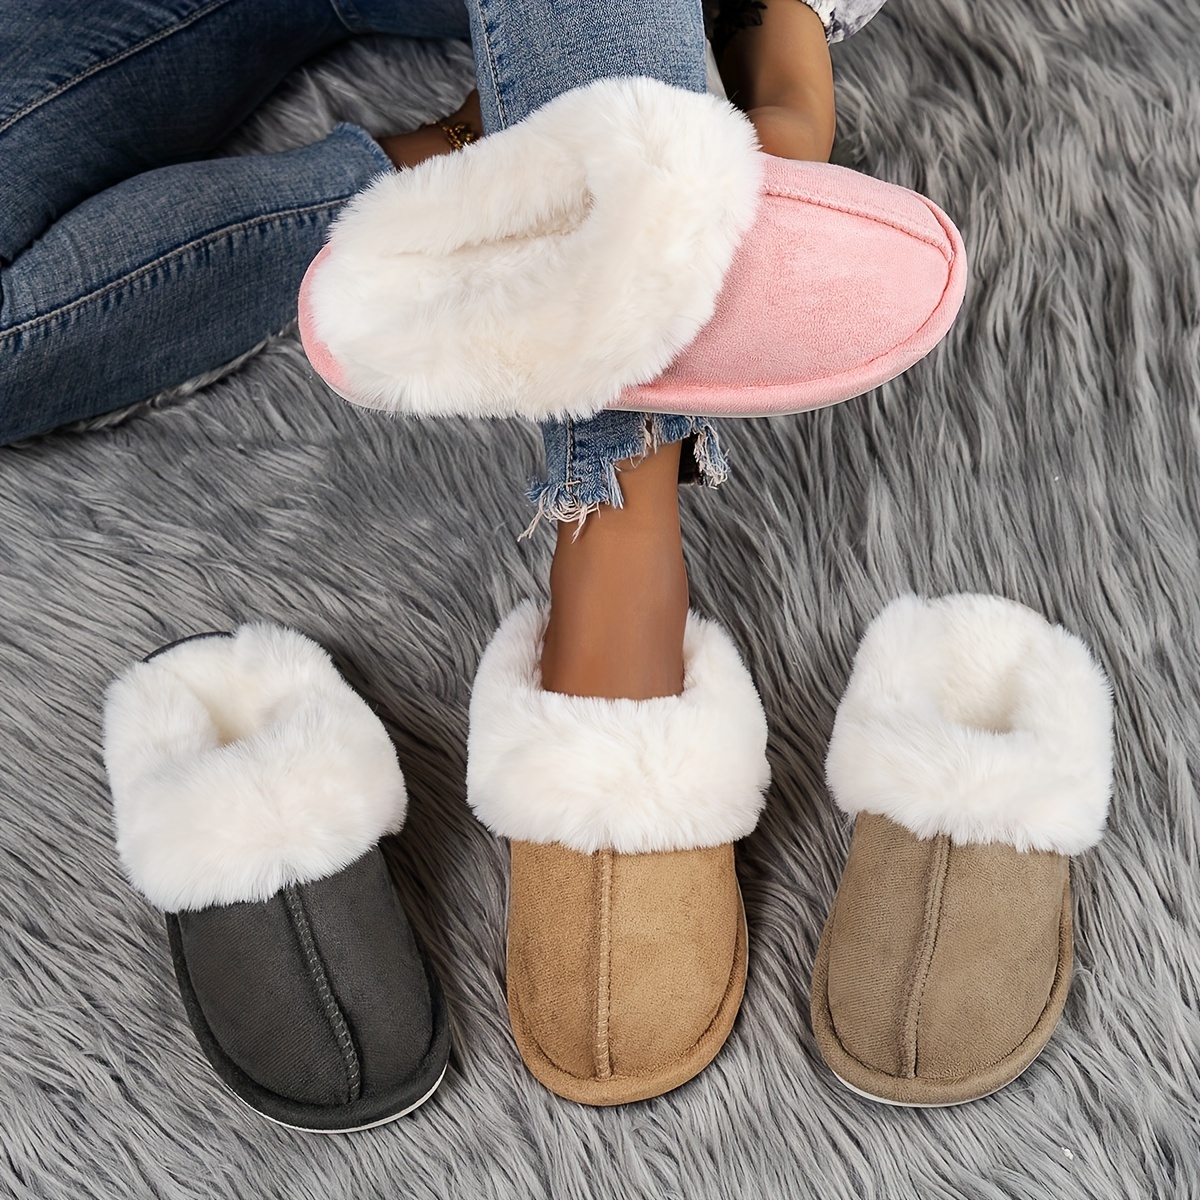 SOSUSHOE Womens Slippers Memory Foam Fluffy Fur Soft Slippers Warm House  Shoes Indoor Outdoor Winter